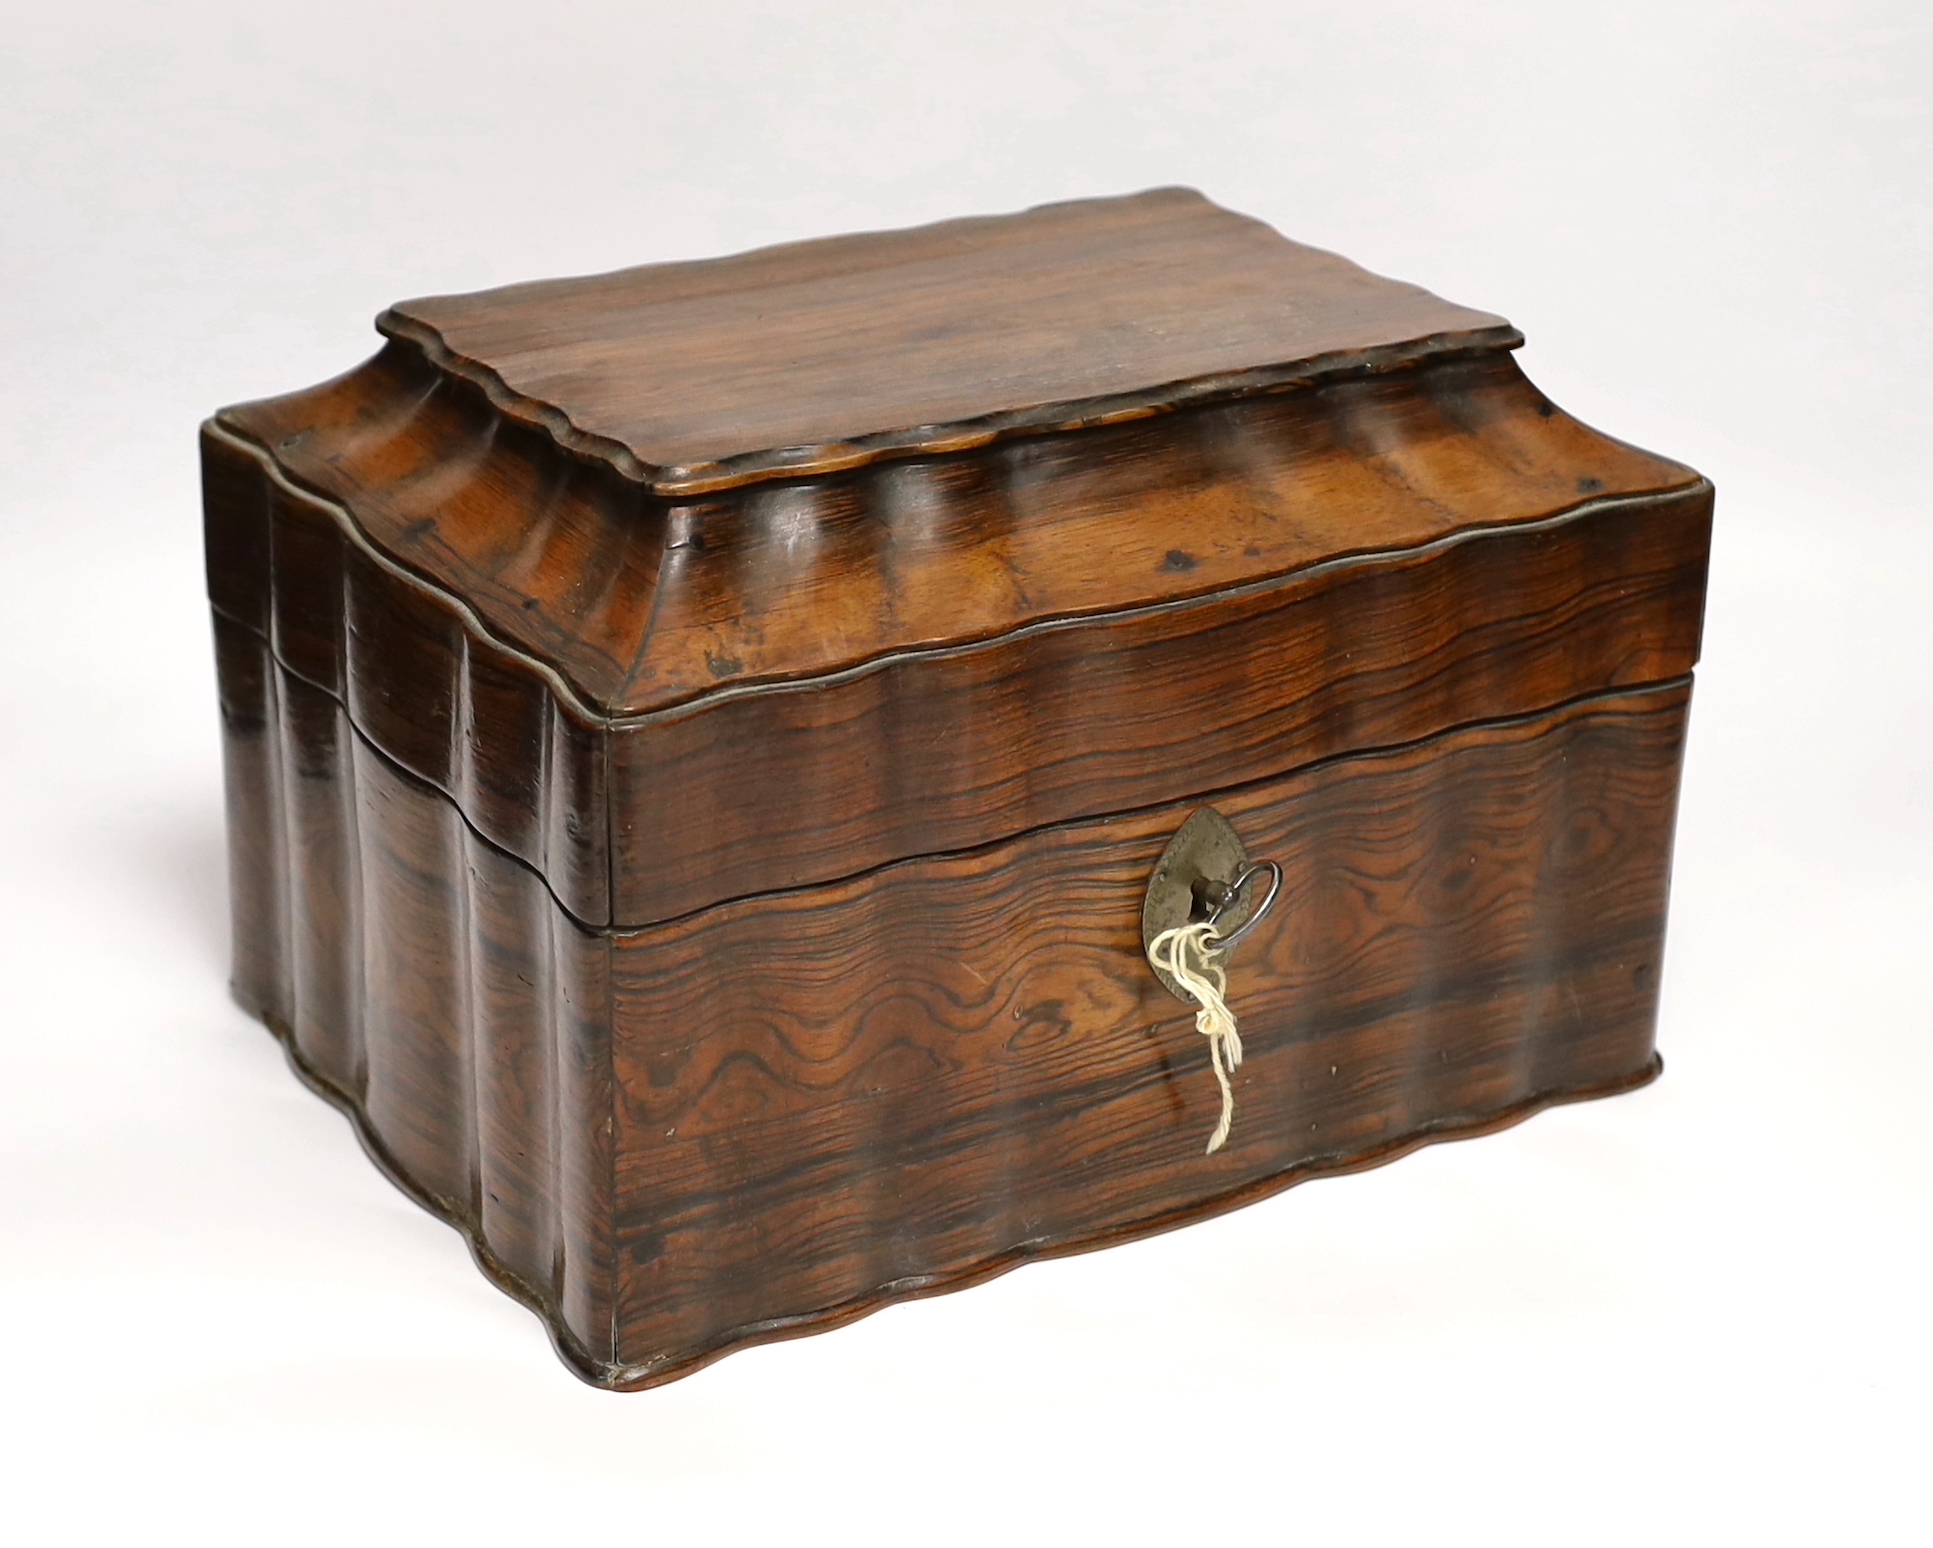 A Ceylonese calamander tea caddy, c.1820, with four internal compartments and key, 29cm wide